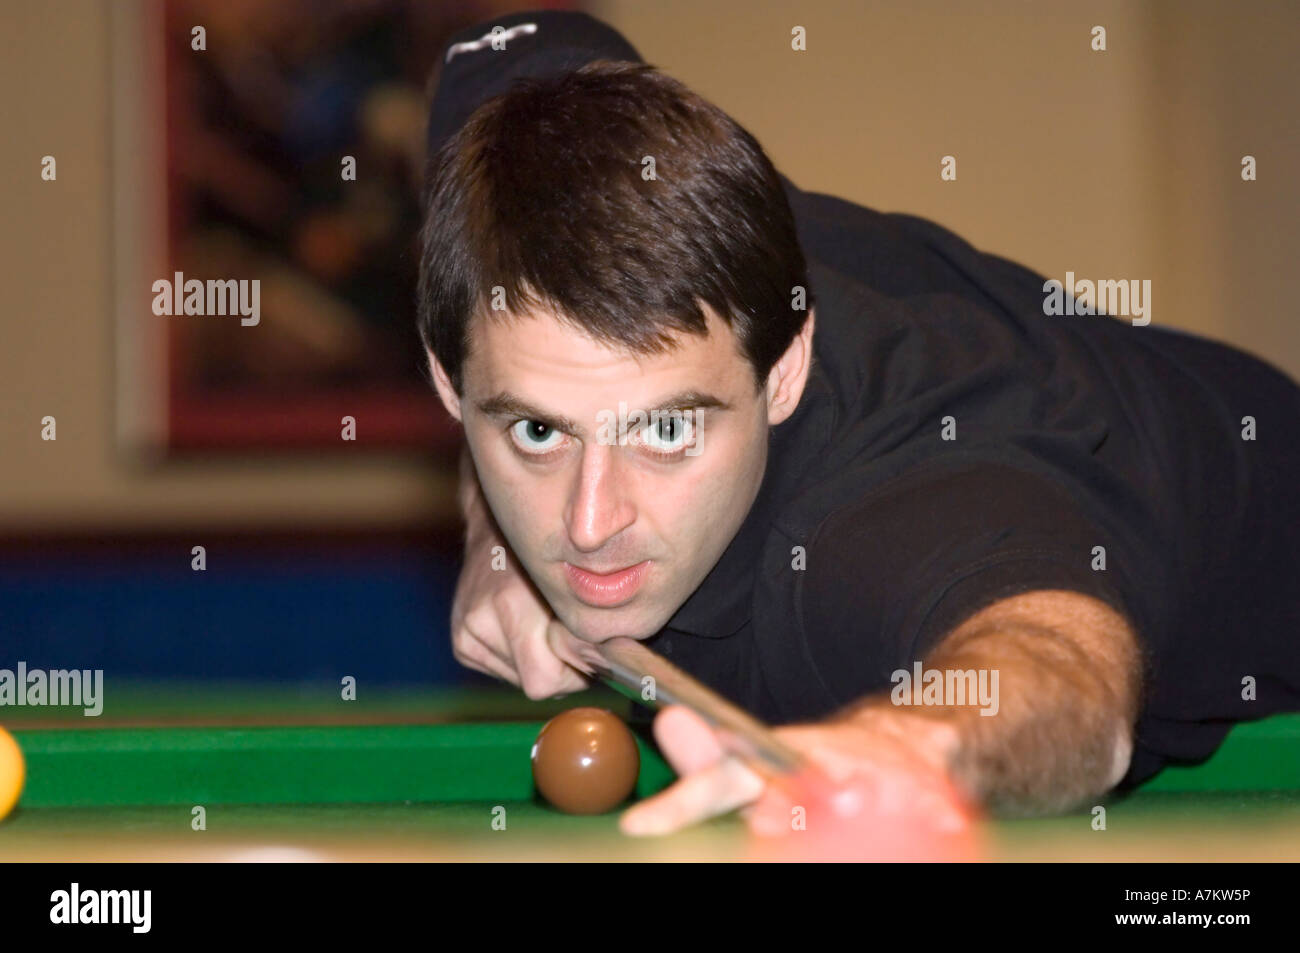 World Champion Snooker Player Ronnie O Sullivan at a event Stock Photo - Alamy